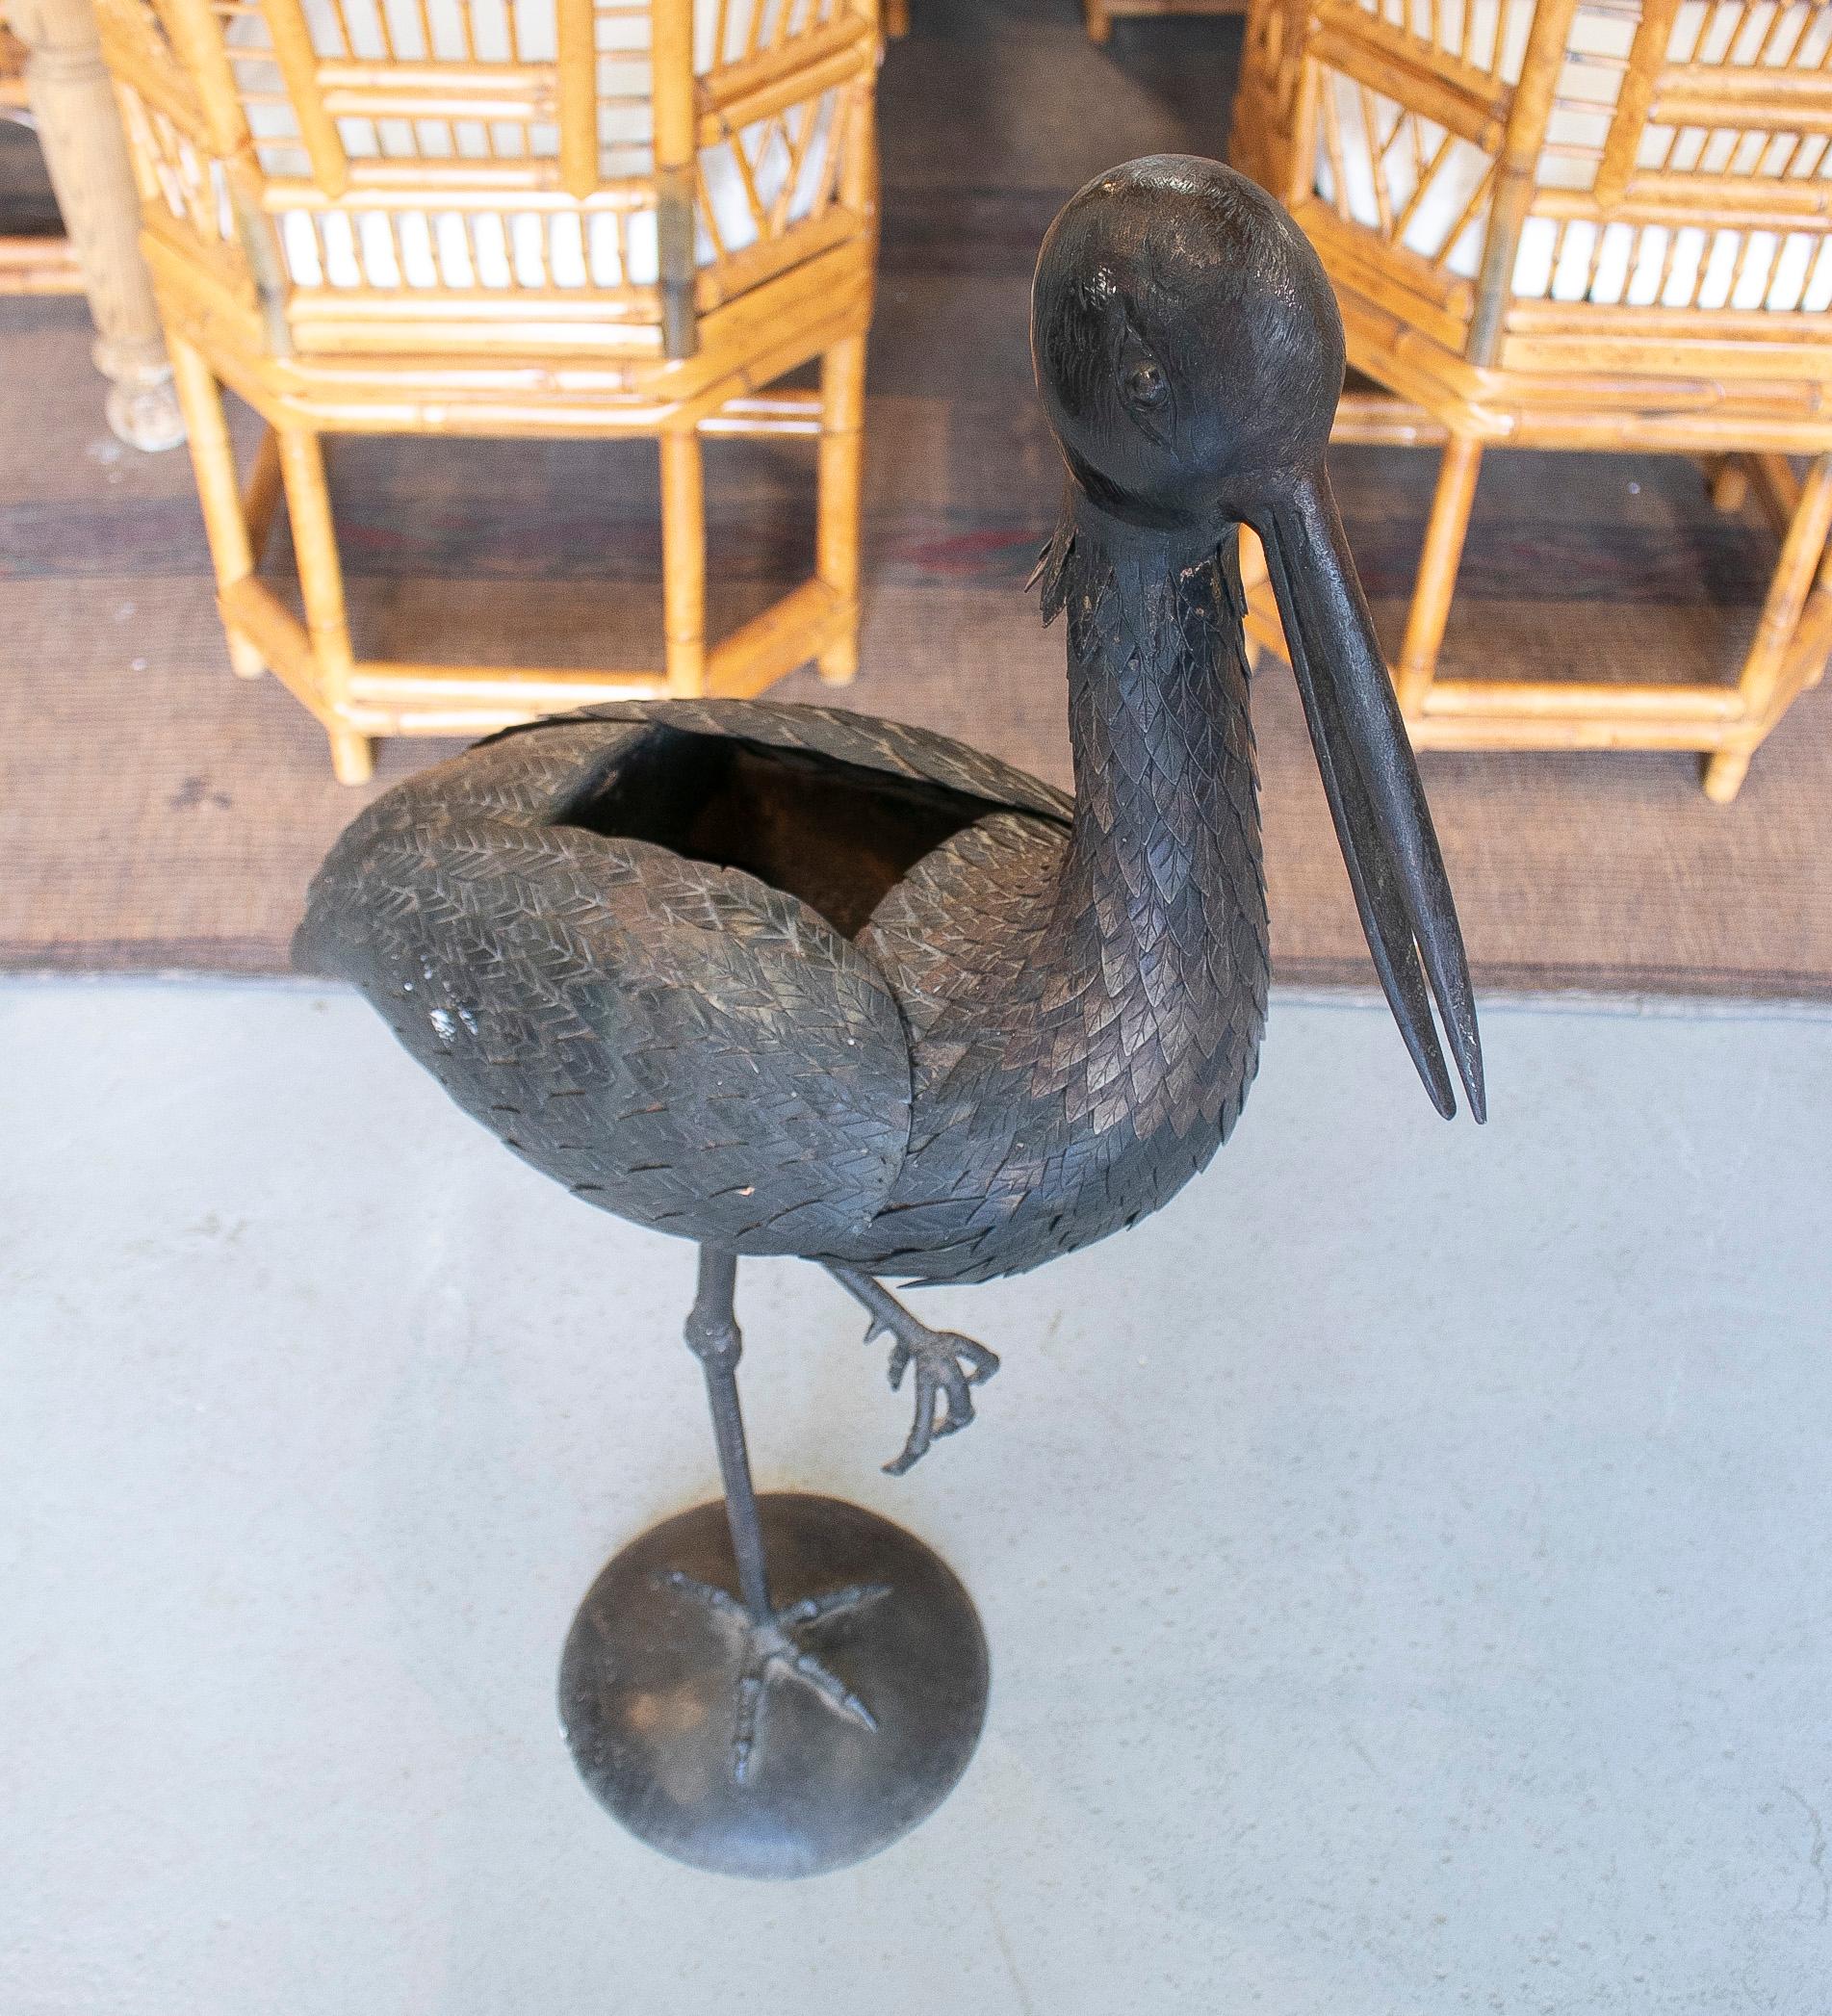 1970s Spanish bronze heron figure sculpture with wings that open up to access the hollow interior.